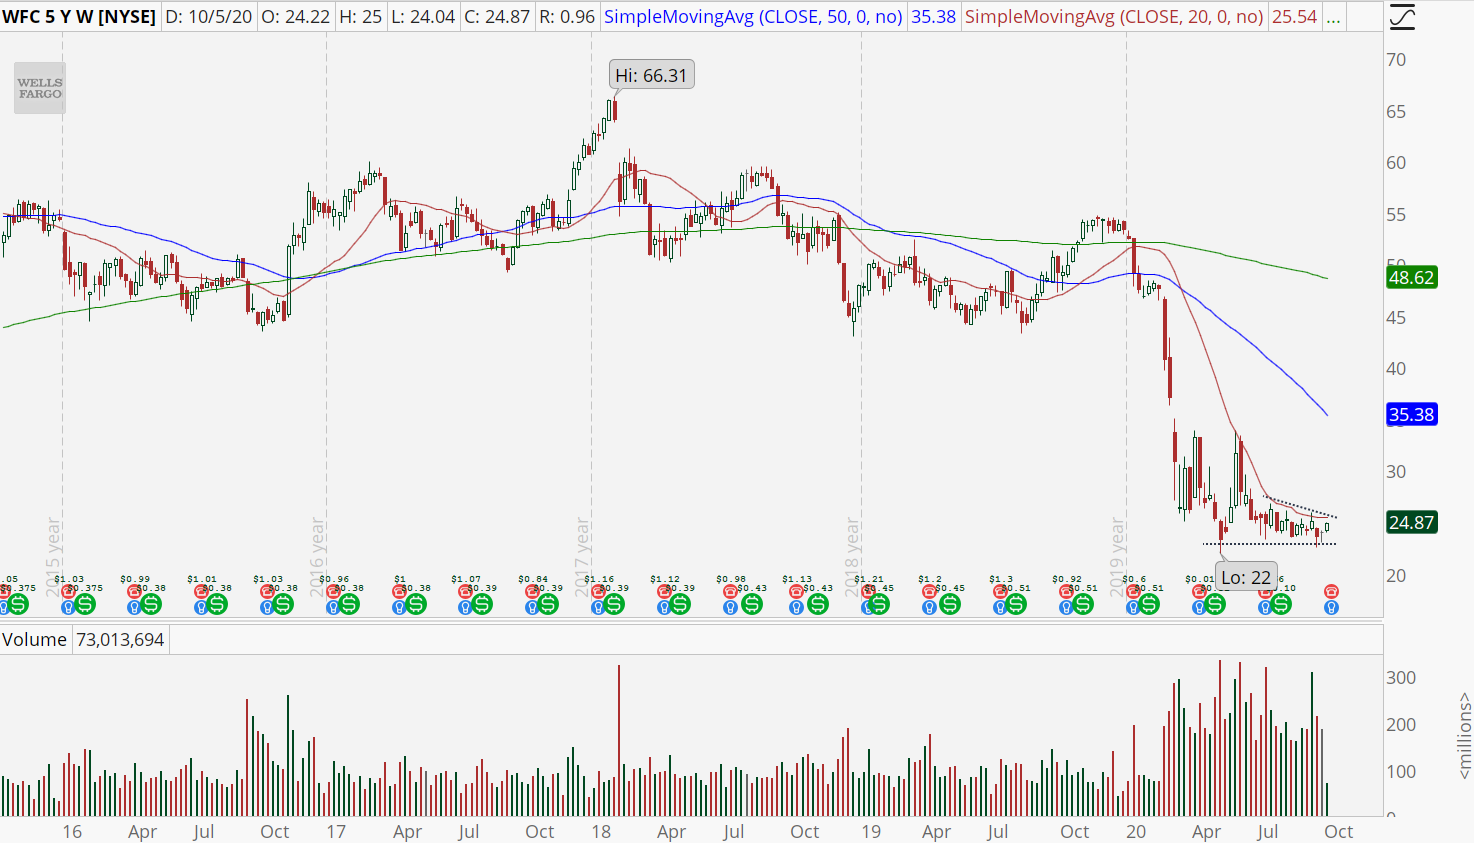 Wells Fargo (WFC) weekly chart showing long-term downtrend